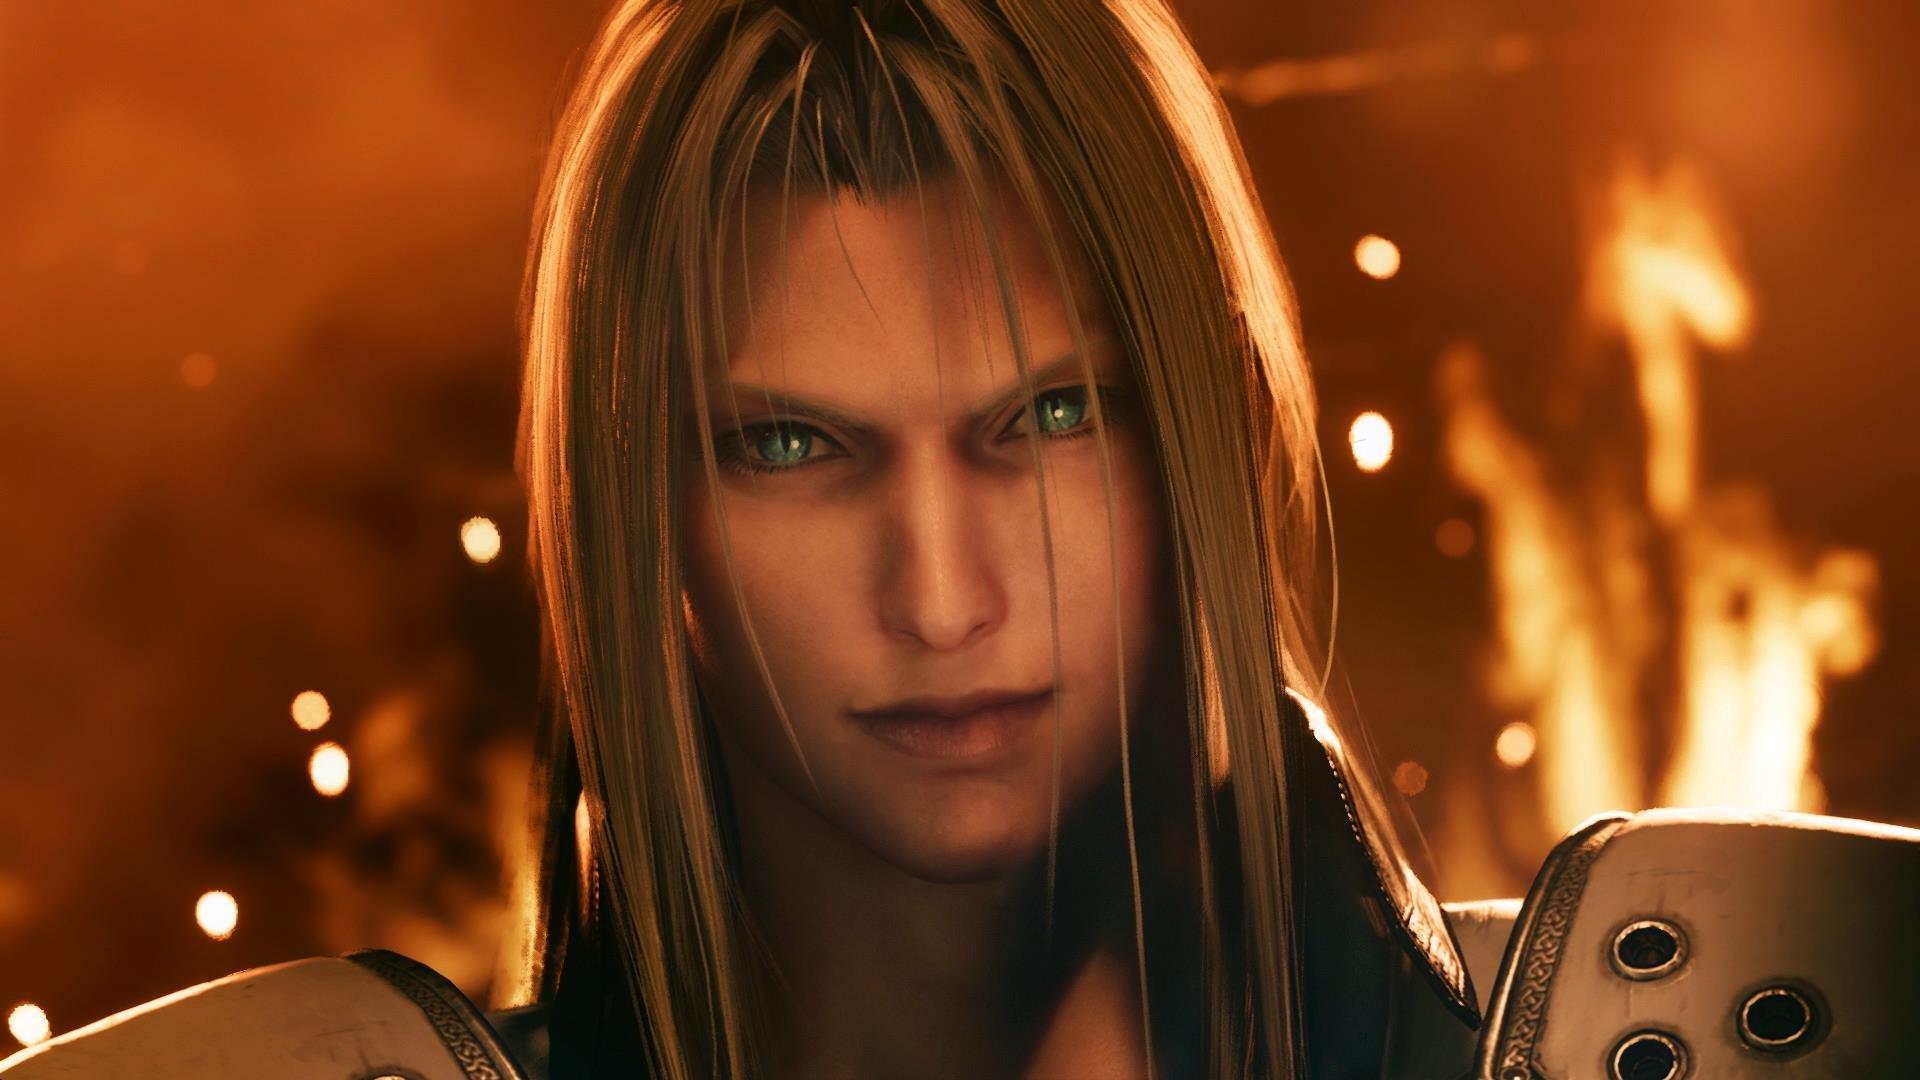 Final Fantasy VII Remake Coming to Xbox One, According to GameStop